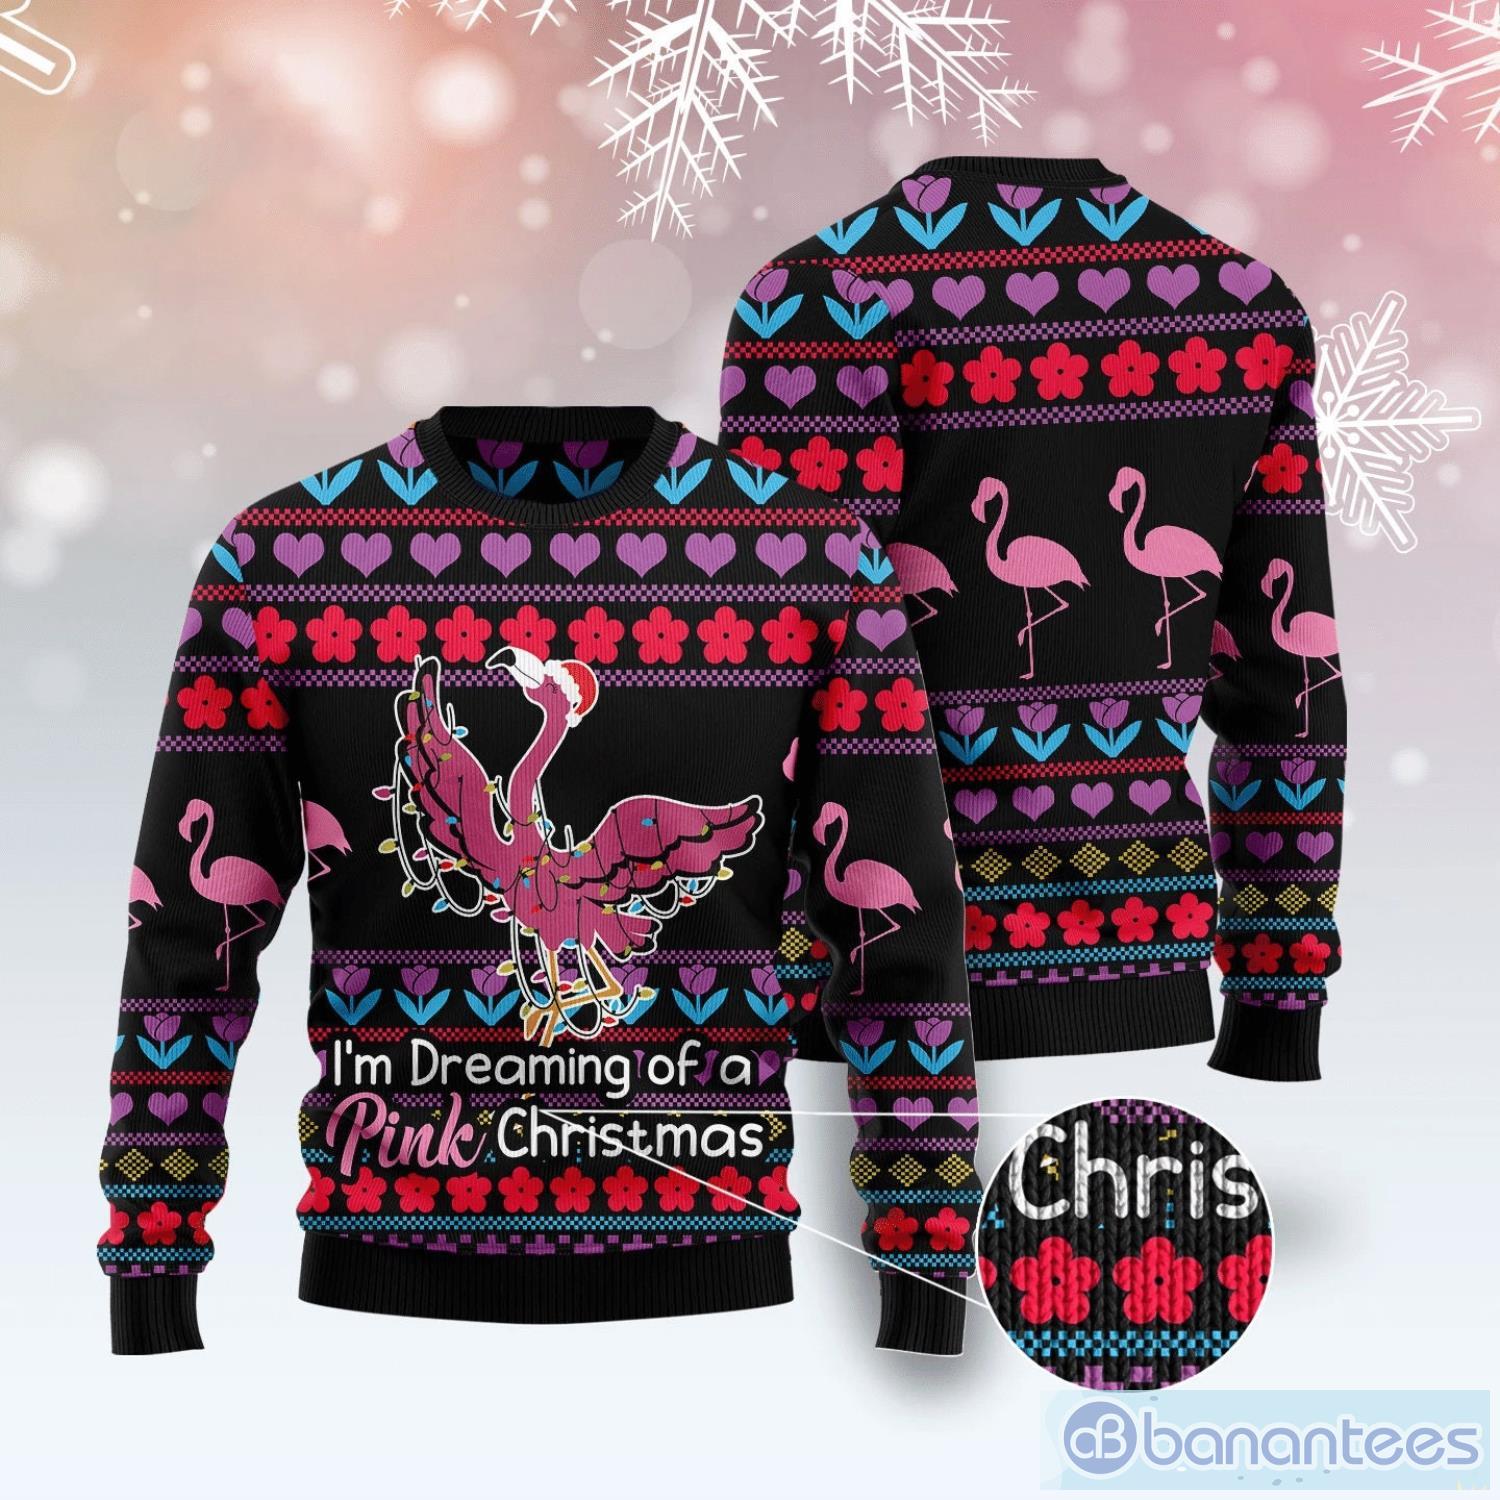 I'm Dreaming Of A Pink Christmas Ugly Sweater Flamingo Christmas Sweater Product Photo 1